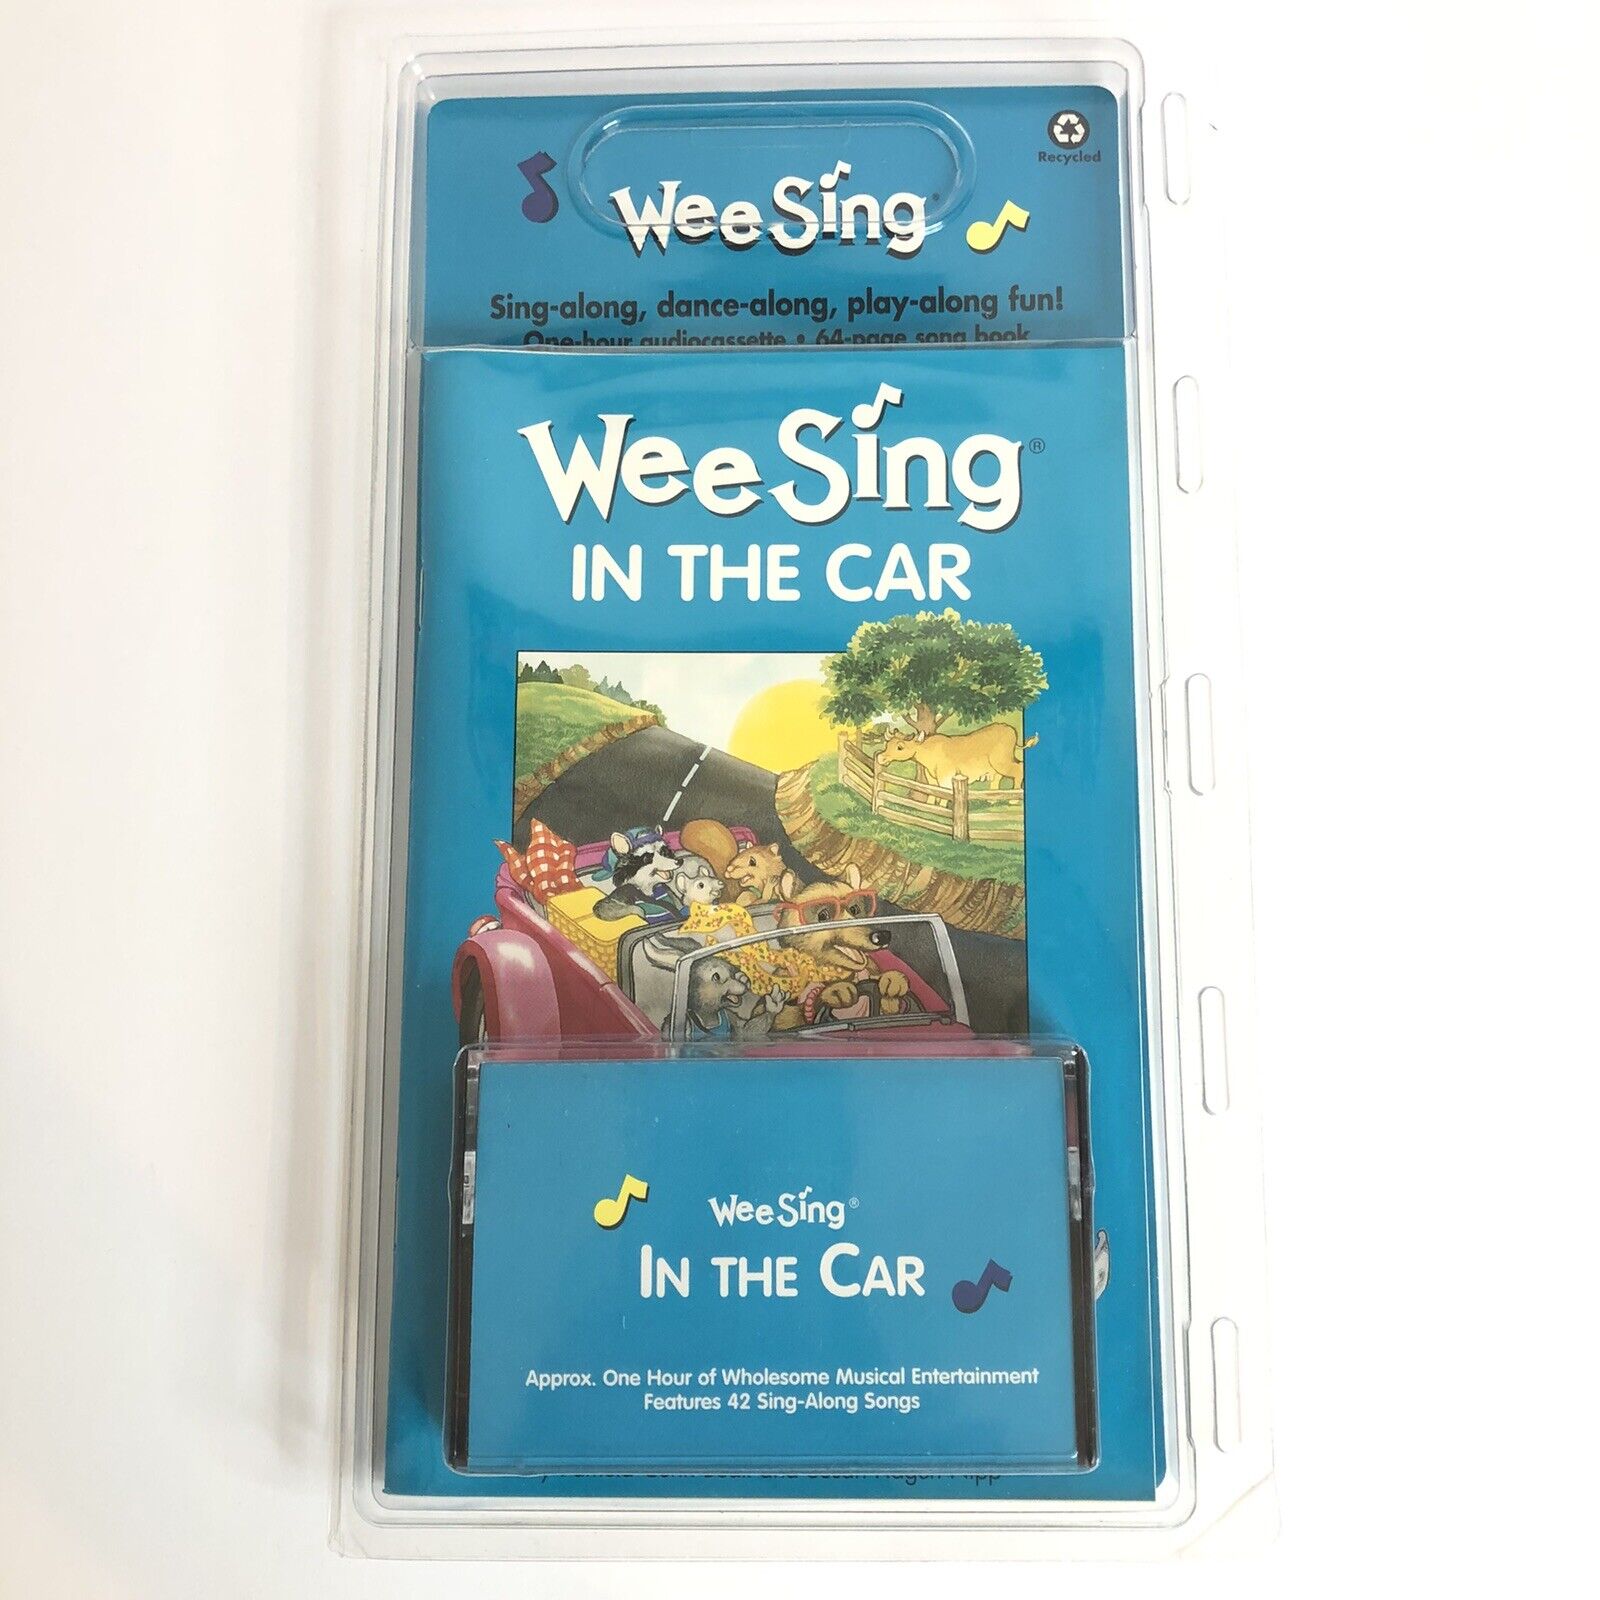 Wee Sing in the Car Cassette Tape and Book Vintage 1999 New in Package Sealed